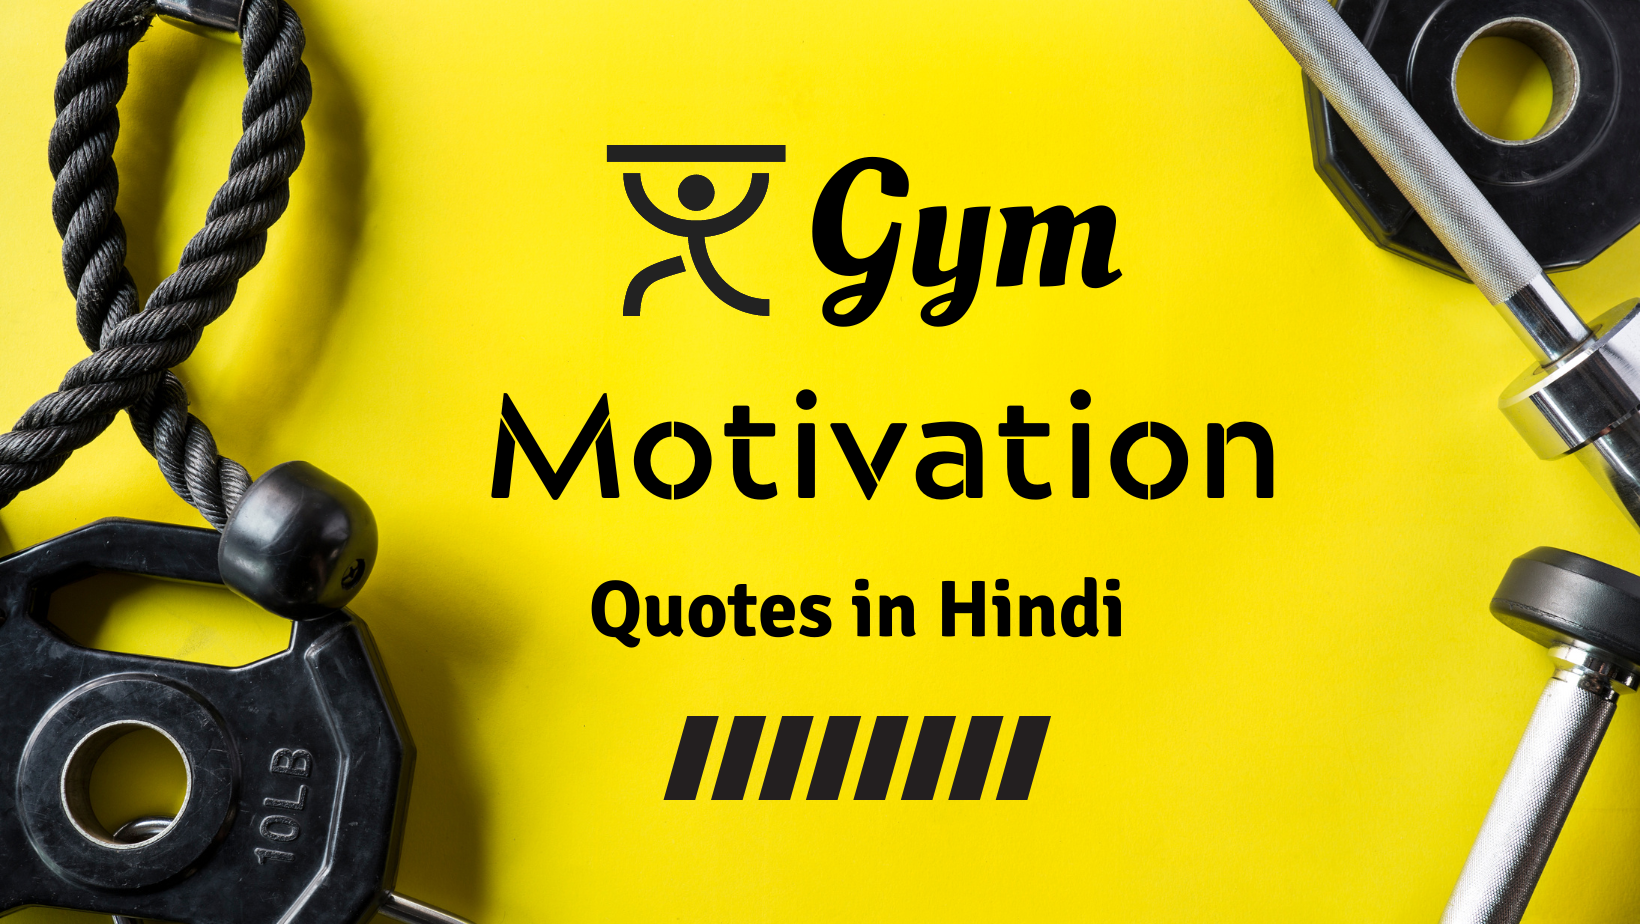 Gym Motivation Quotes in Hindi with images